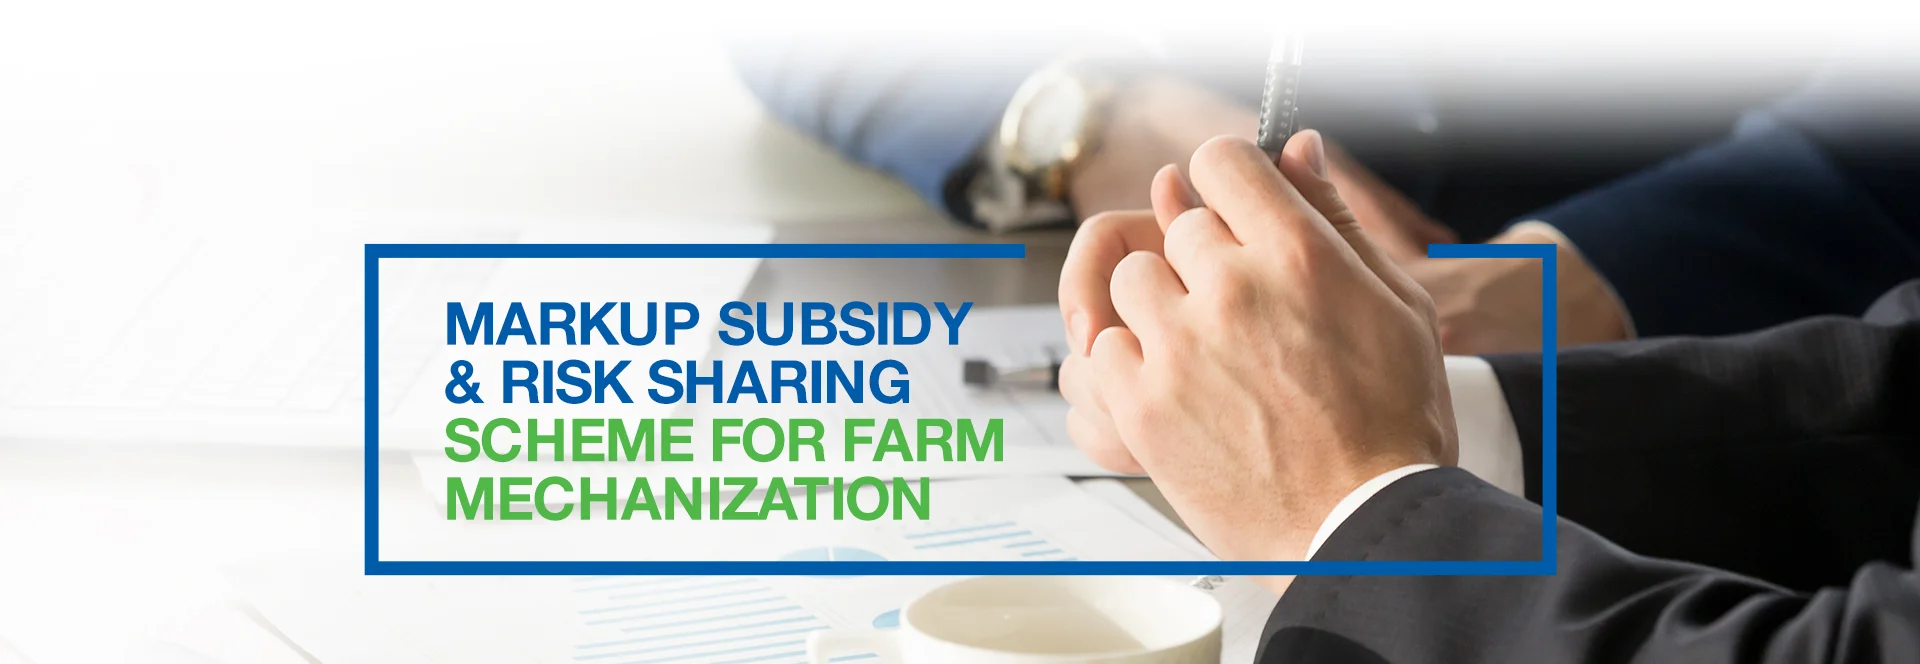 Markup Subsidy And Risk Sharing Scheme For Farm Mechanization